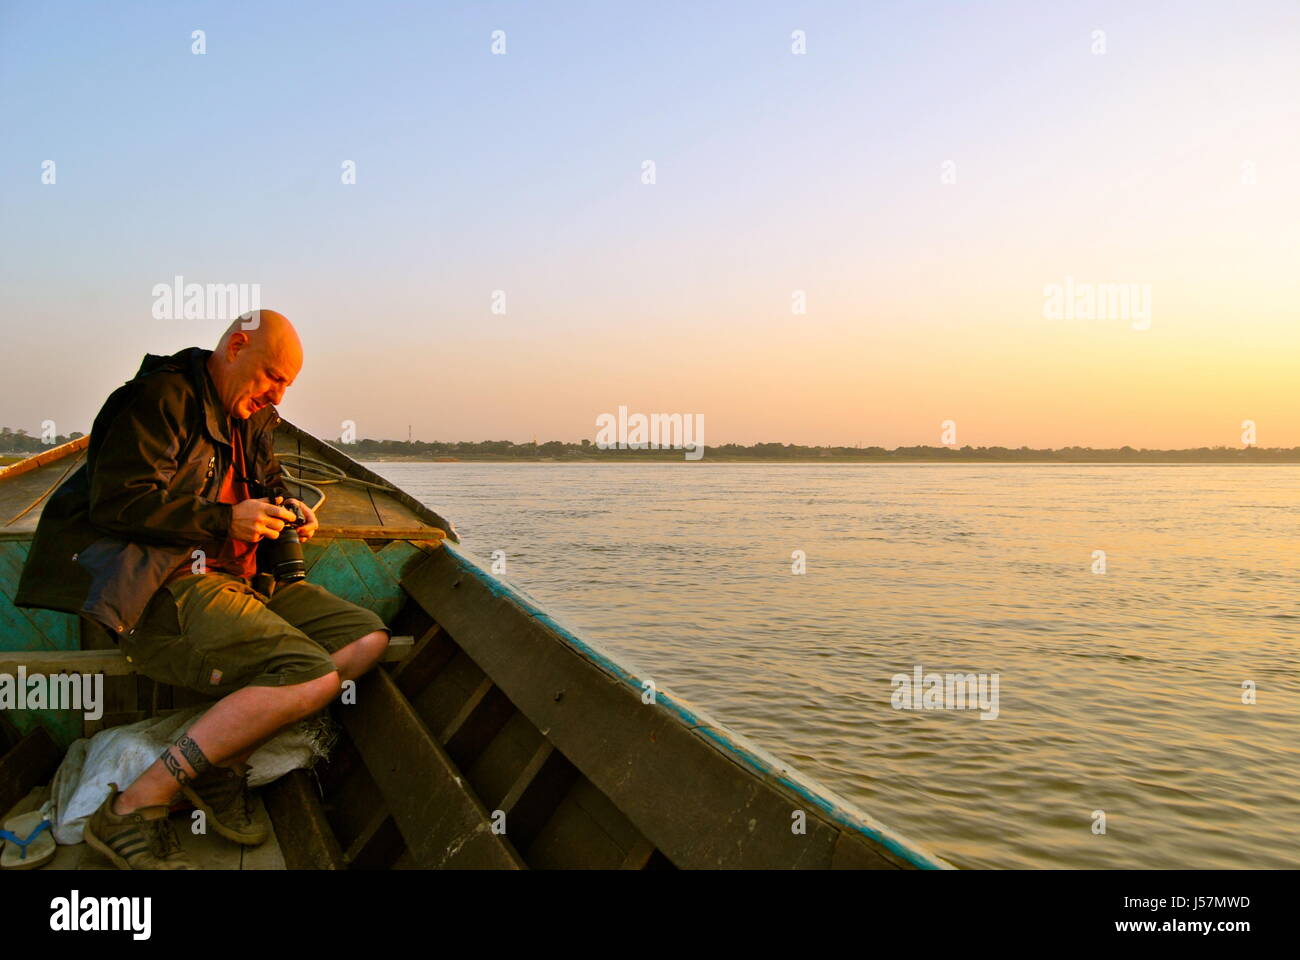 Man taking photos of a sunset on the Irrawaddy River, Bagan, Myanmar Stock Photo